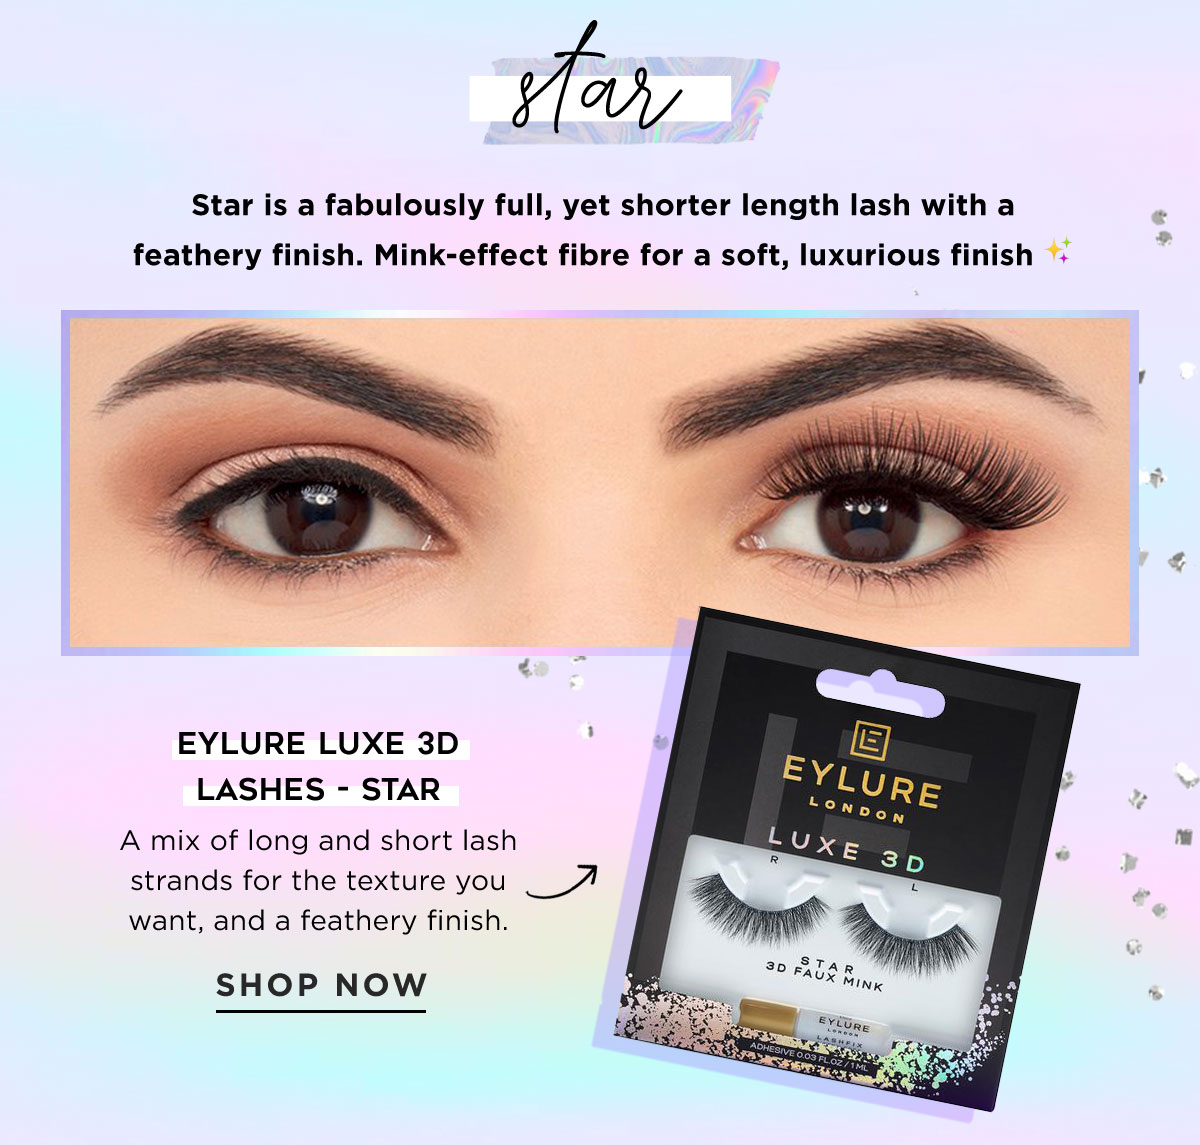 EYLURE LUXE 3D LASHES - STAR